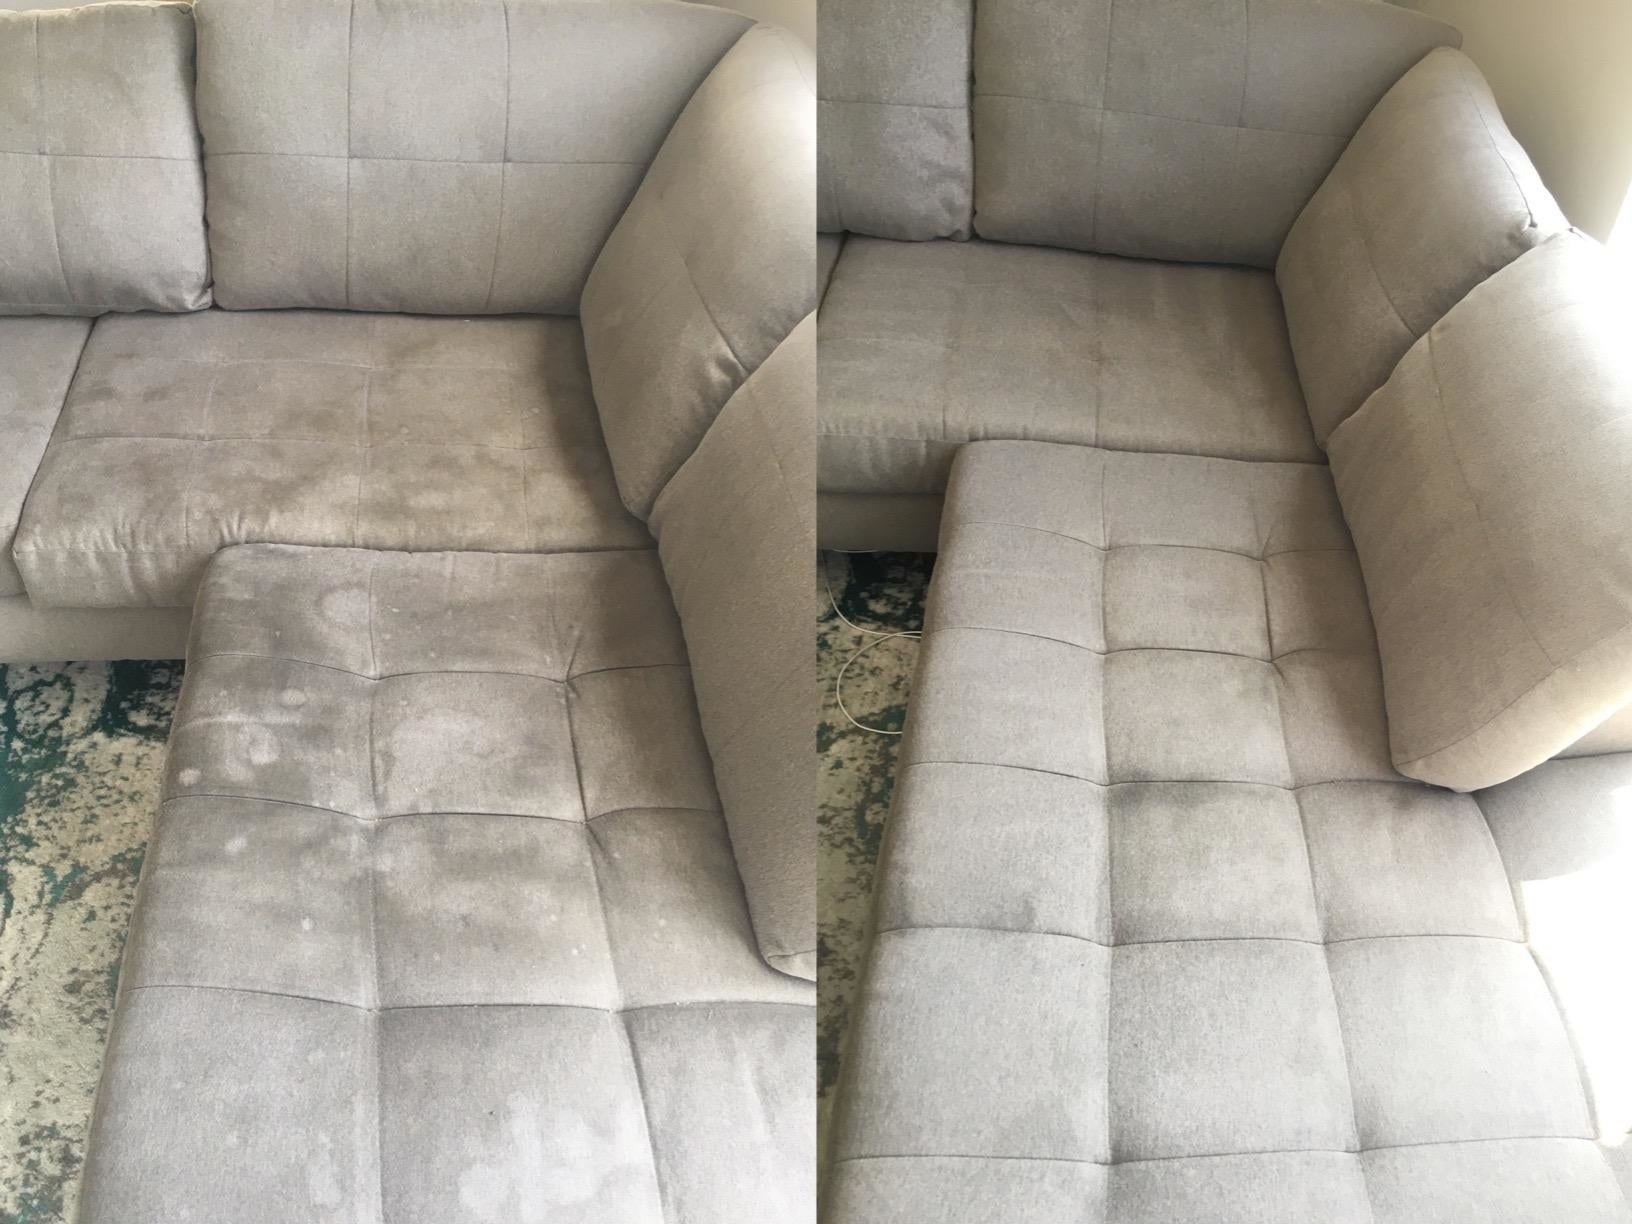 MAGIC COUCH CLEANER, HOW TO MAKE YOUR OLD COUCH LOOK NEW